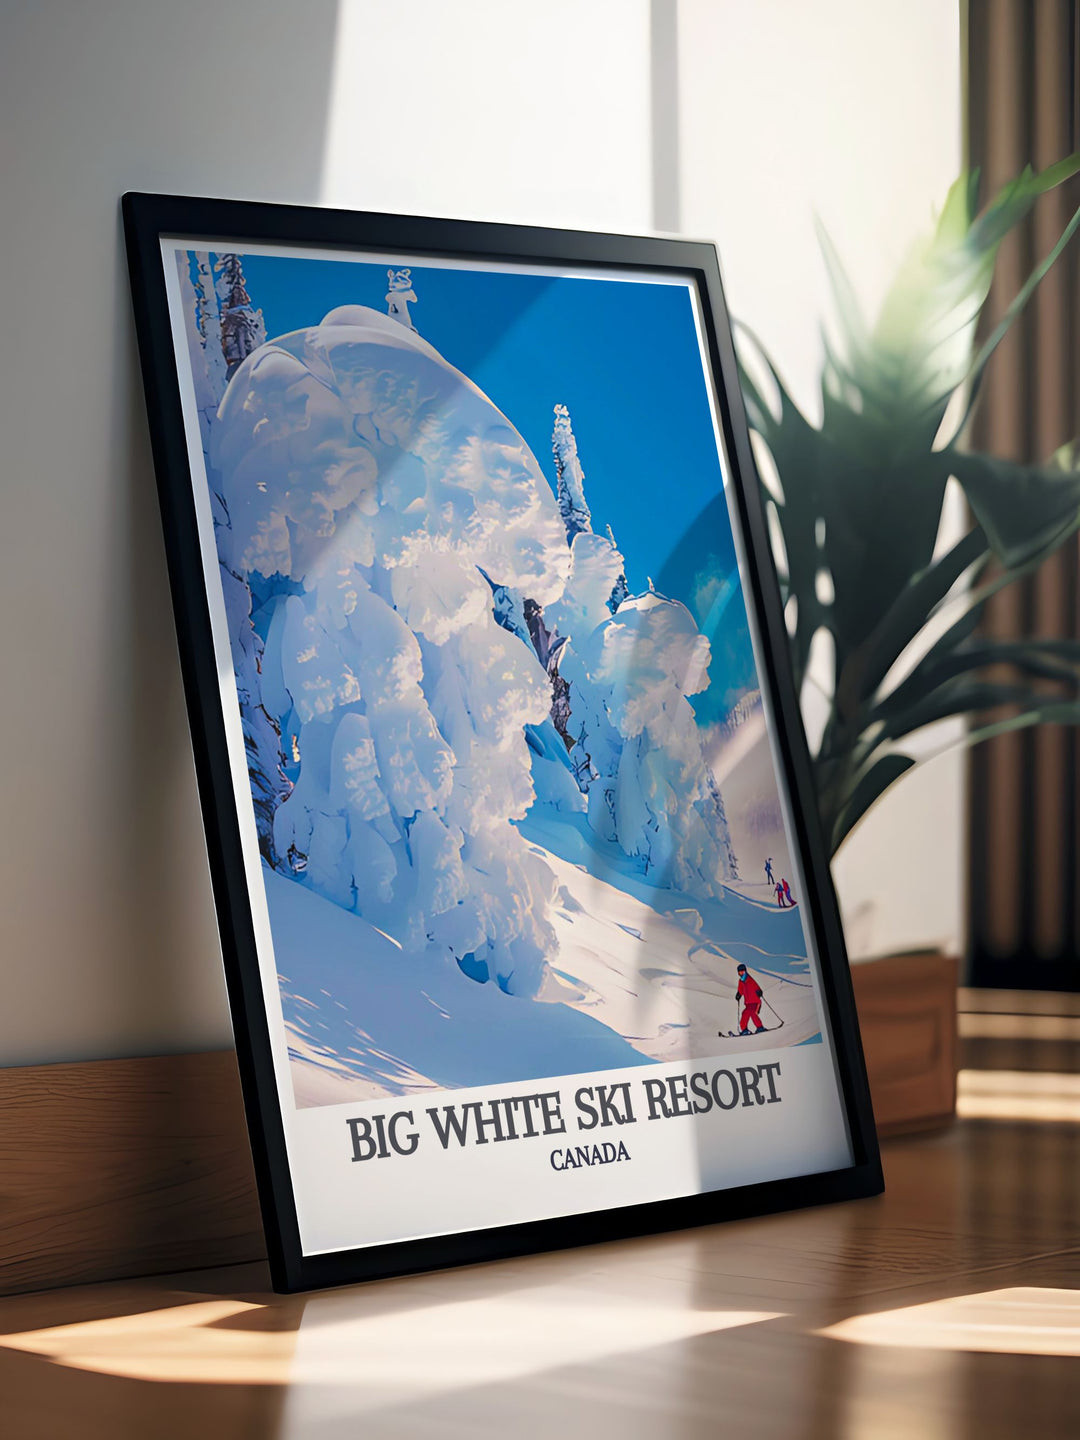 Custom print of Big Whites snow ghosts, designed to capture the serene and mystical quality of these natural sculptures, perfect for personalized decor that brings the magic of the Rockies into your home.